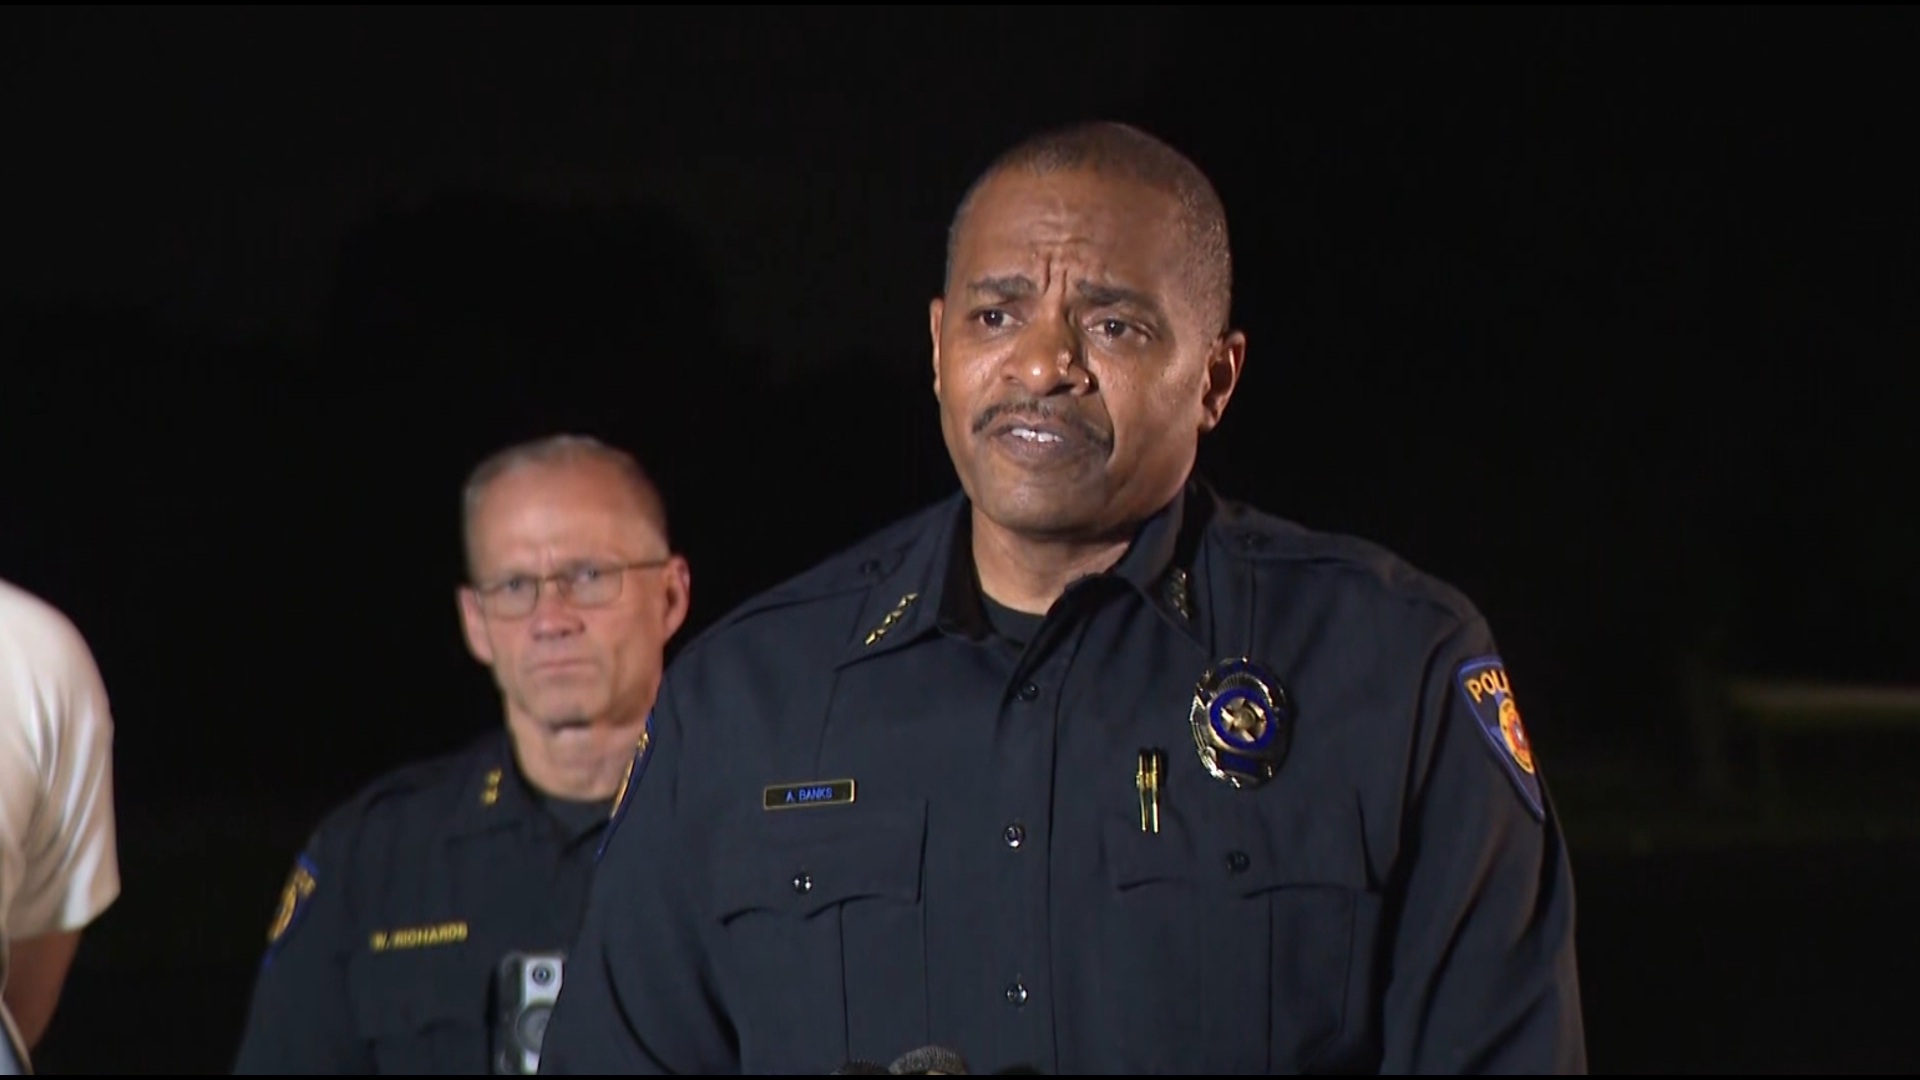 After two people were killed at a Juneteenth celebration in Round Rock, Texas, Police Chief Allen Banks gave an update to media.